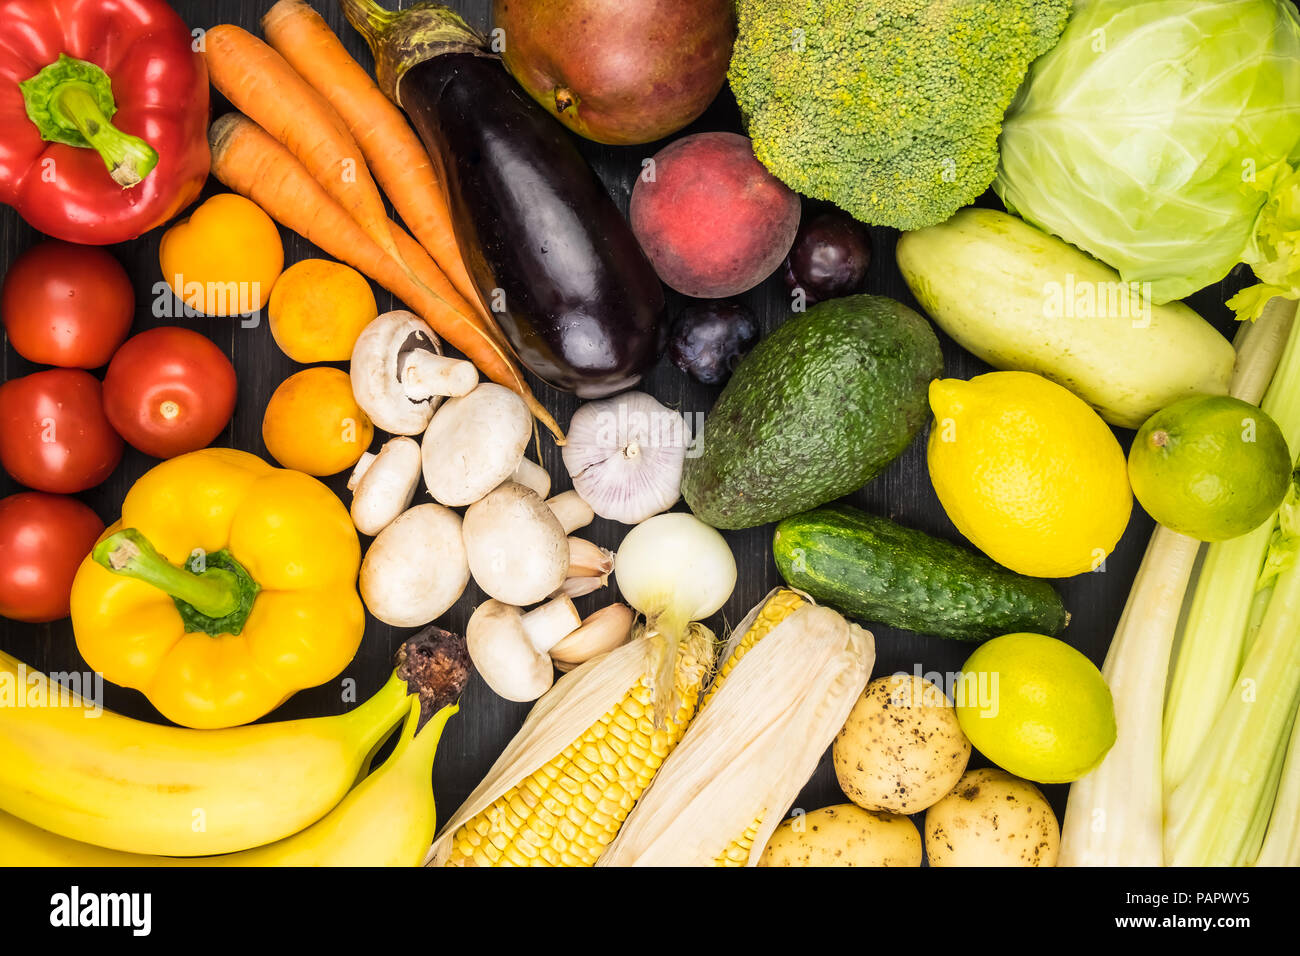 Close-up top view image of fresh organic vegetables and fruit. Locally grown bell pepper, corn, carrot, mushrooms and other natural vegan food laying  Stock Photo